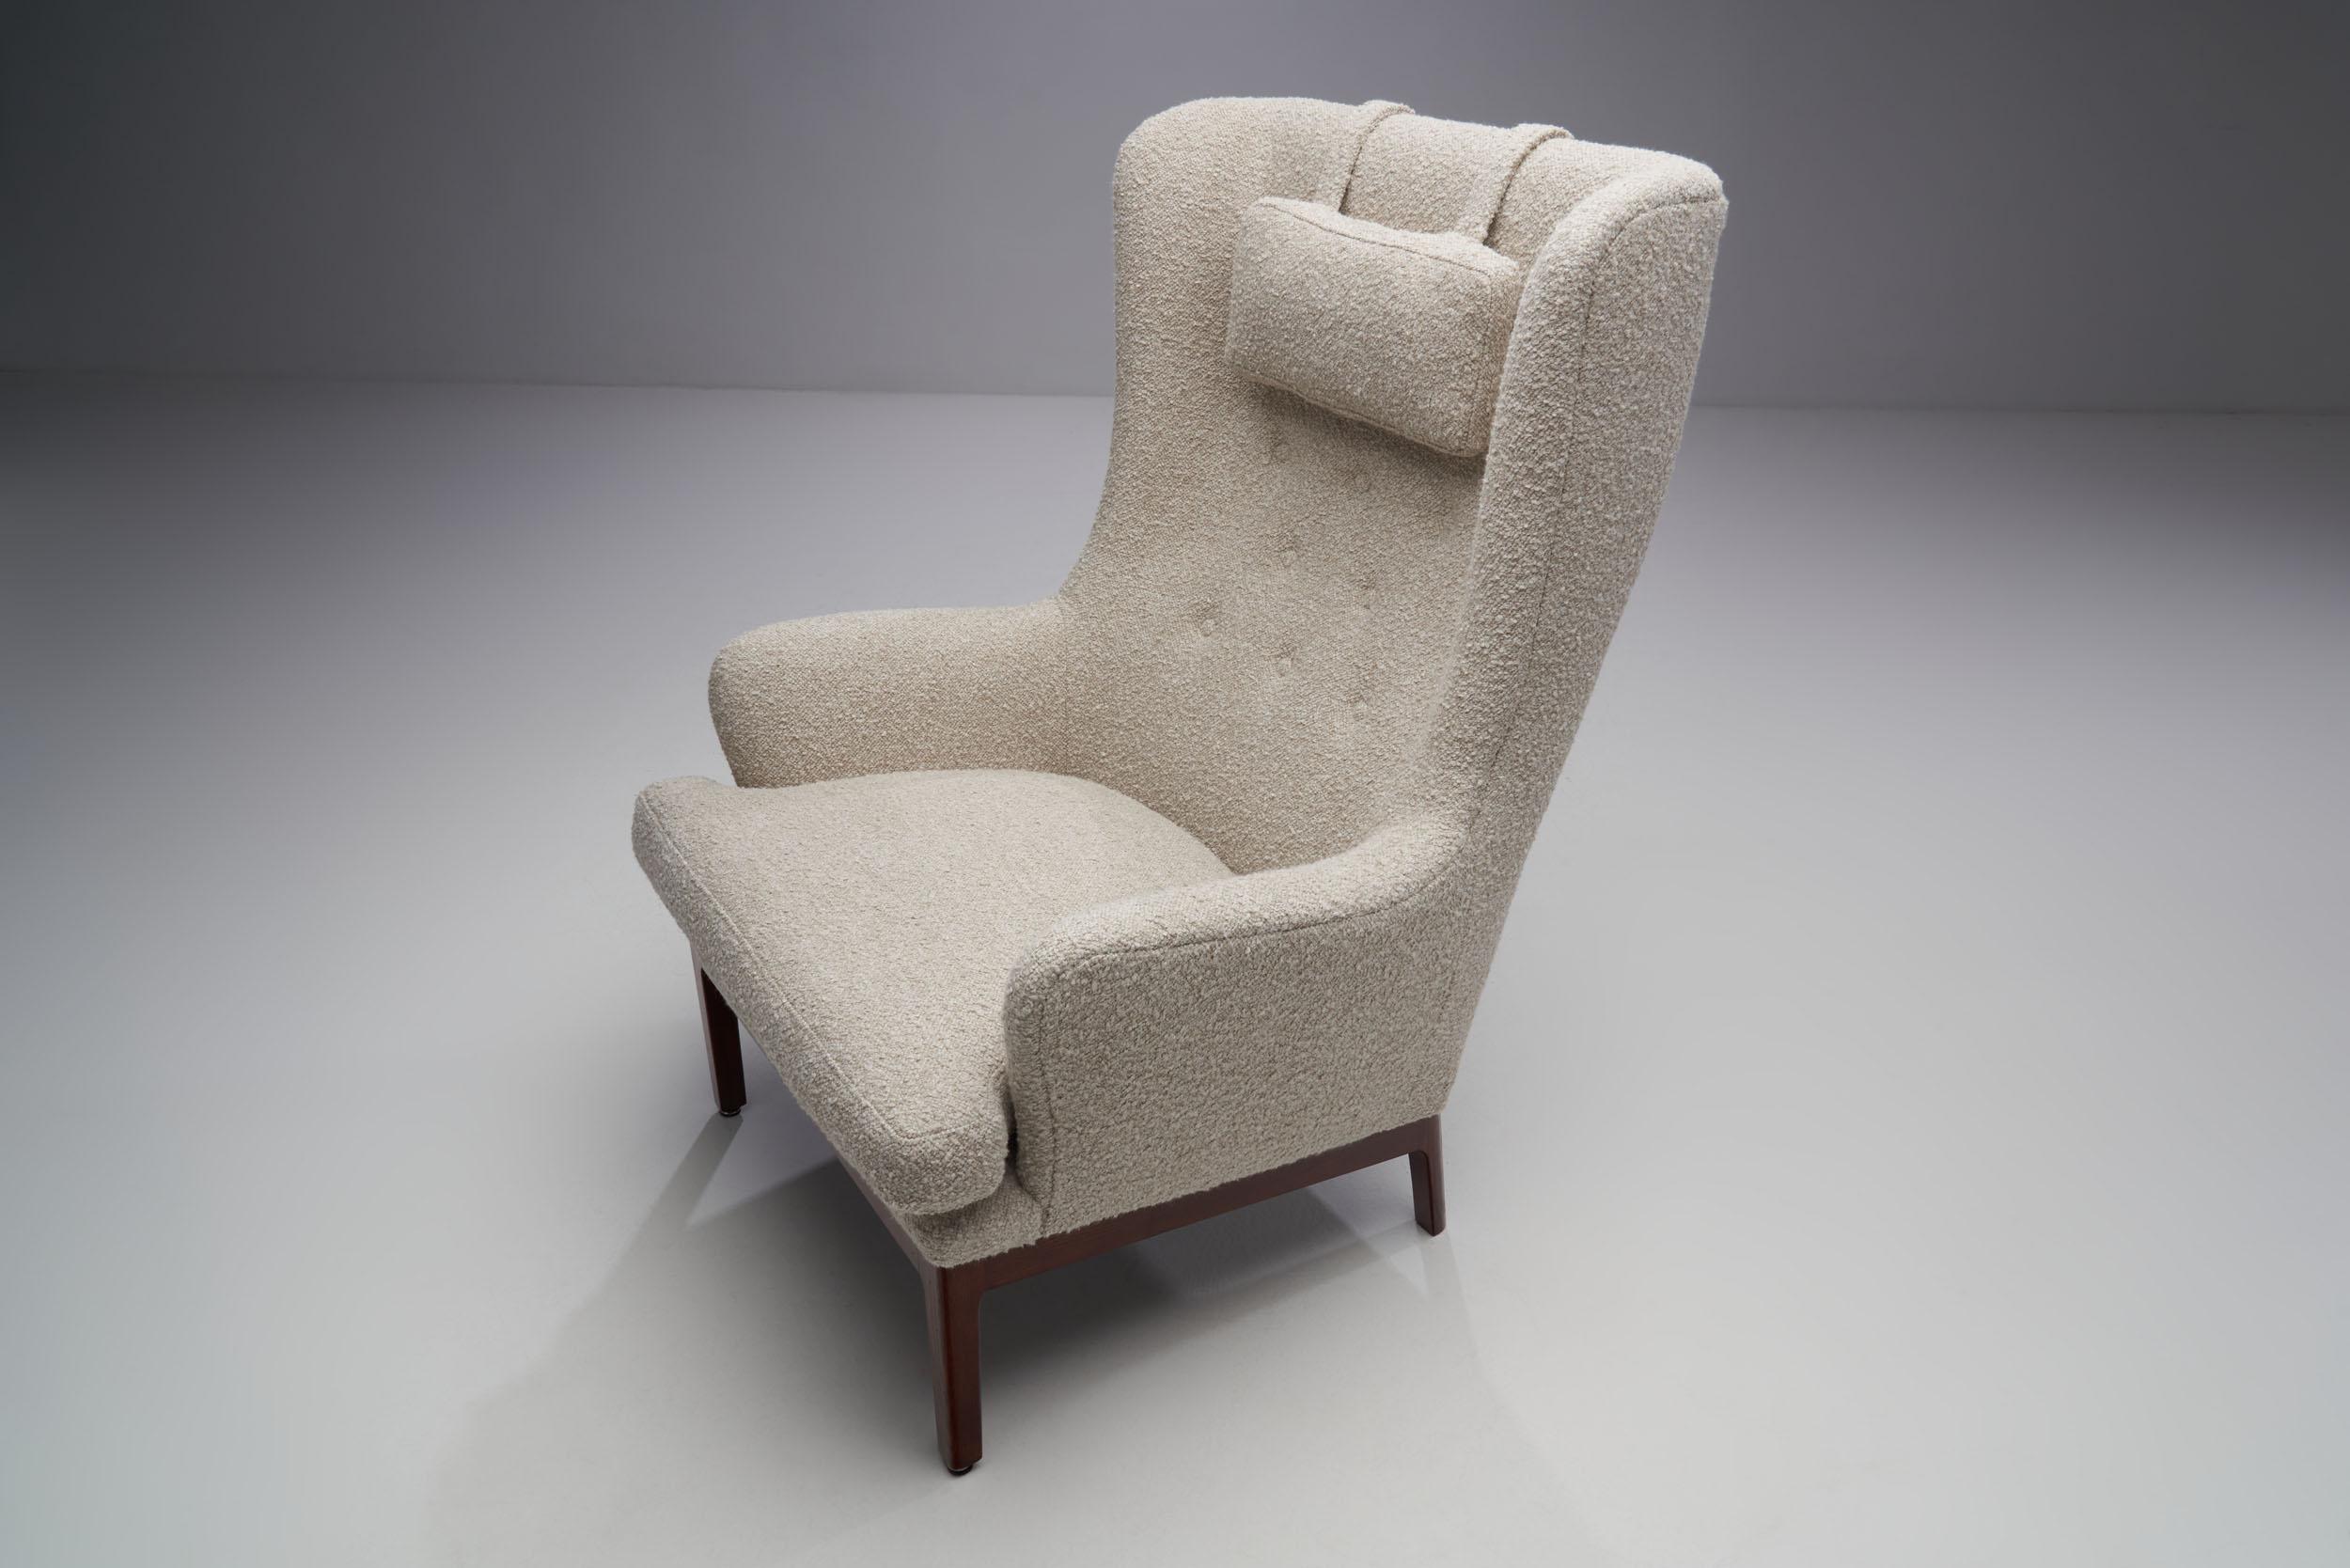 Fabric “Krister” Armchair by Arne Norell for AB Arne Norell Aneby, Sweden, 1960s